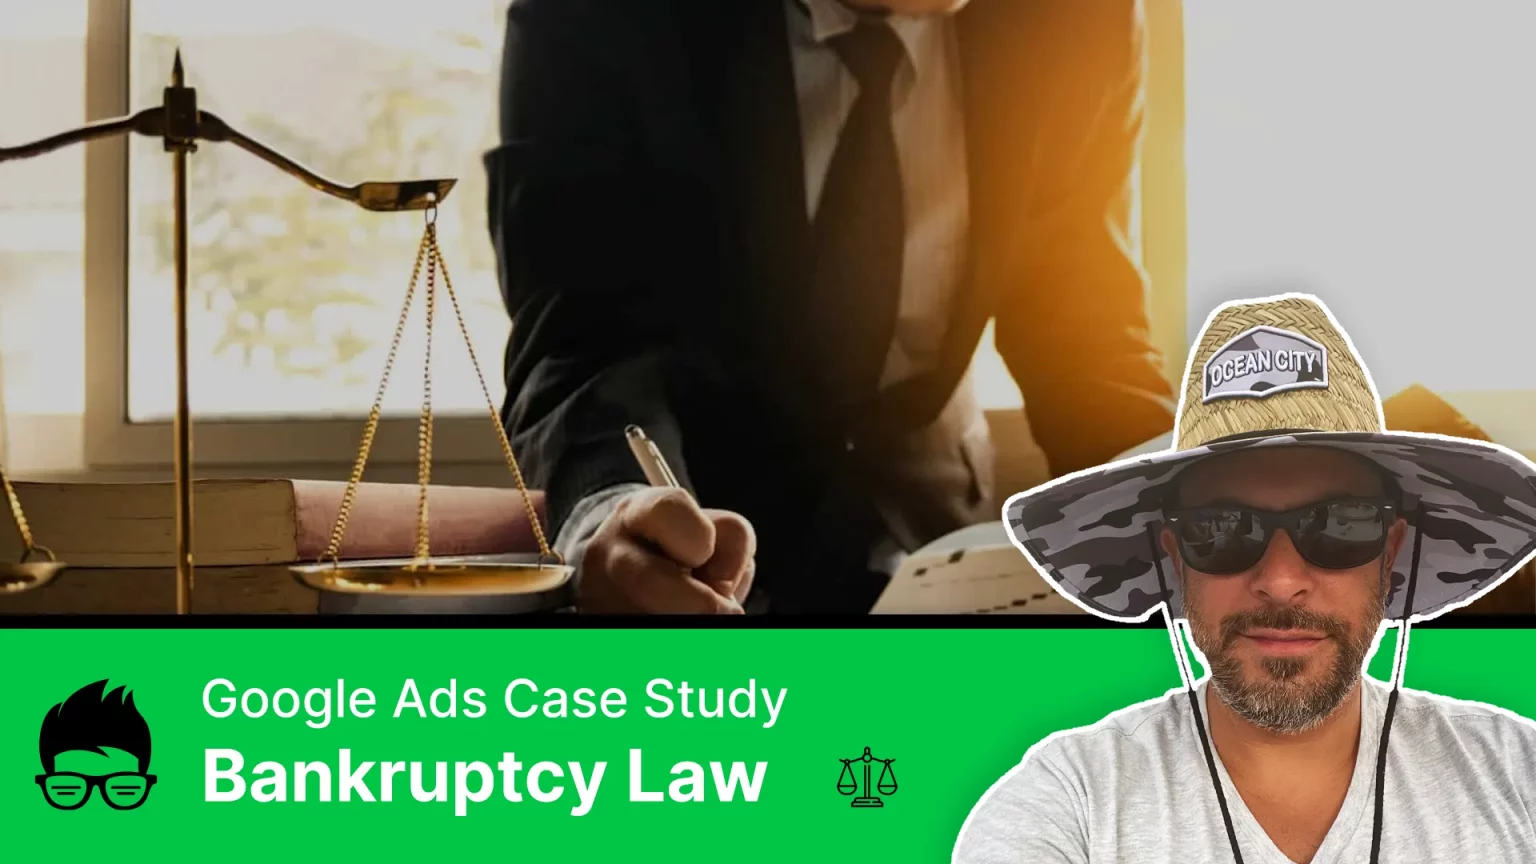 Google Ads Case Study - Bankruptcy Law PPC Ads